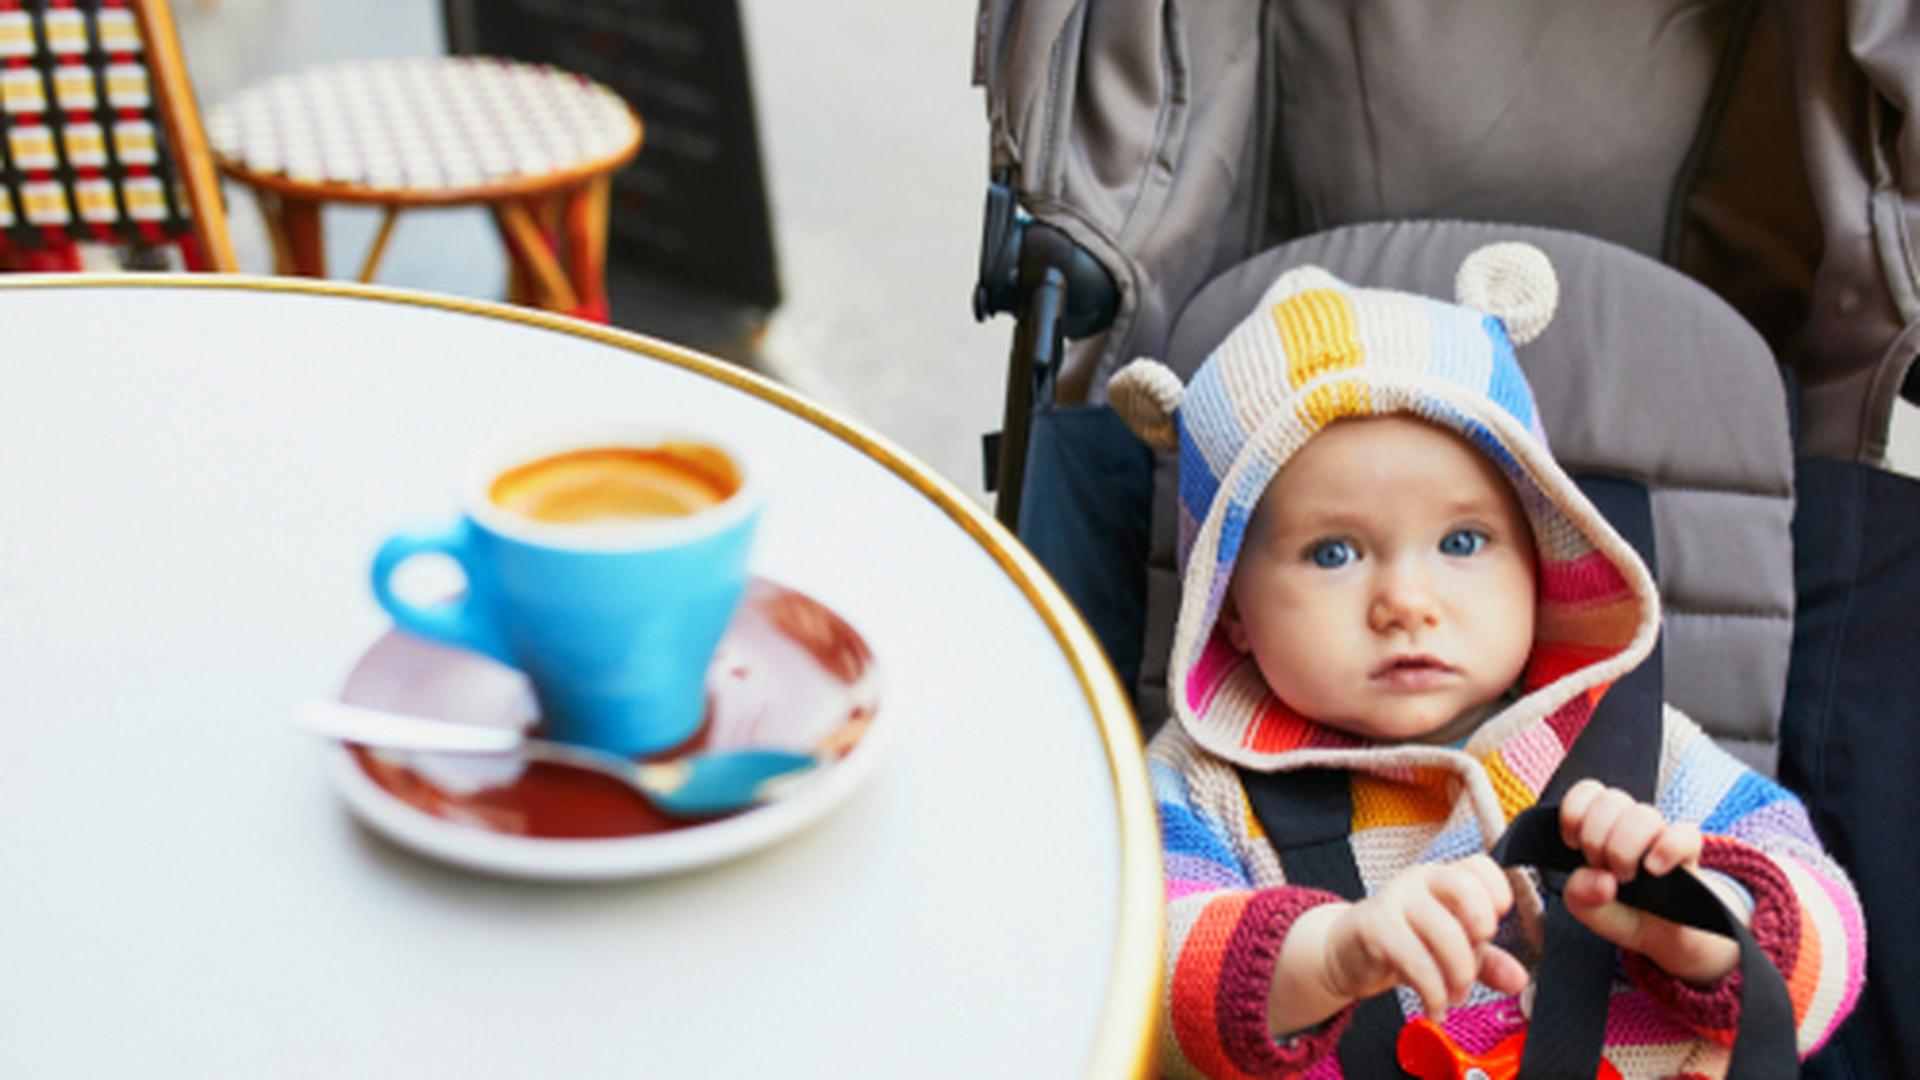 Stroller-friendly places with space and no steps Photo: Shutterstock